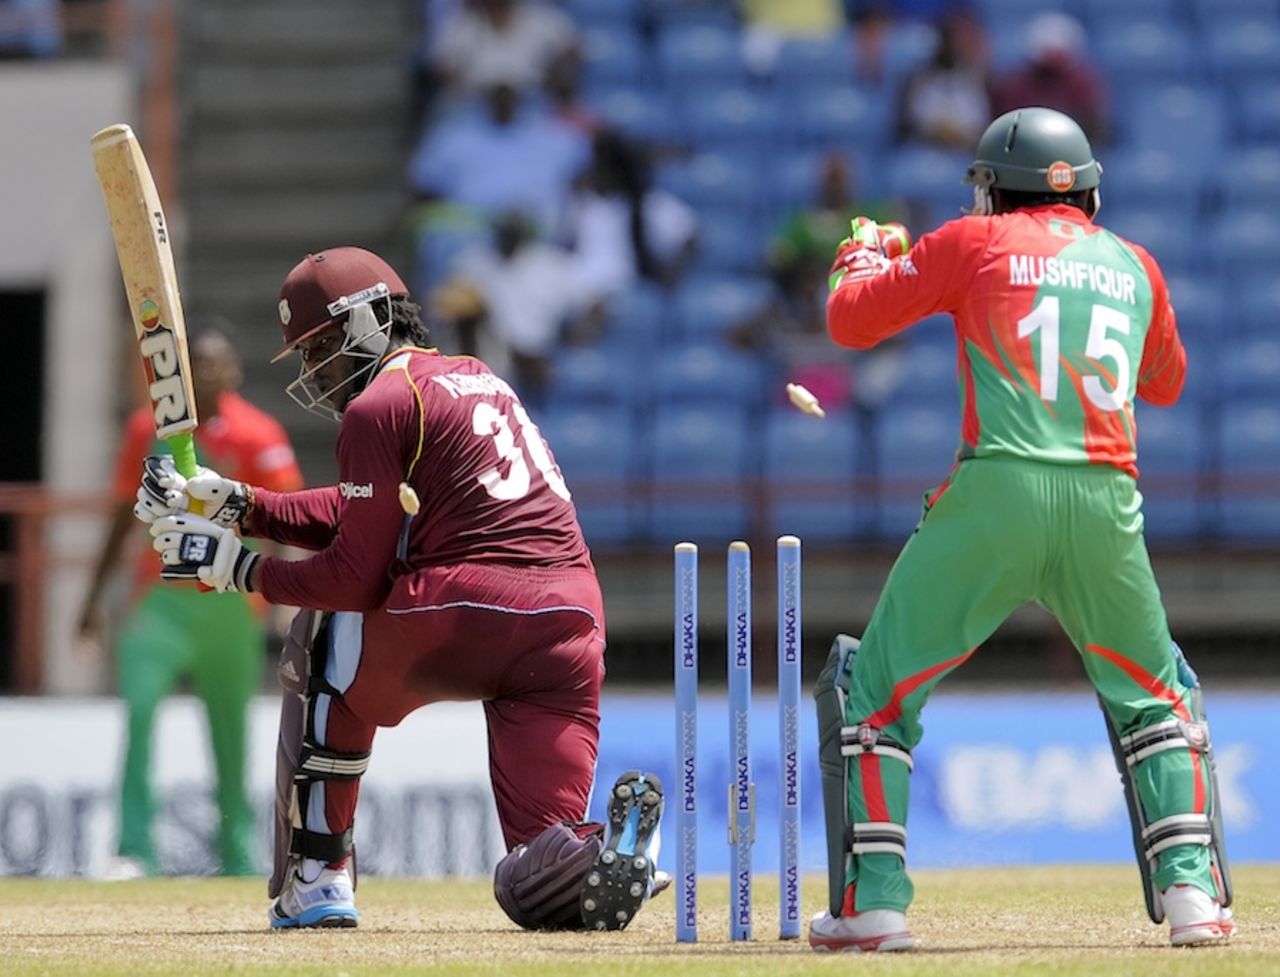 Kirk Edwards was bowled trying to sweep, West Indies v Bangladesh, 1st ODI, St George's, August 20, 2014